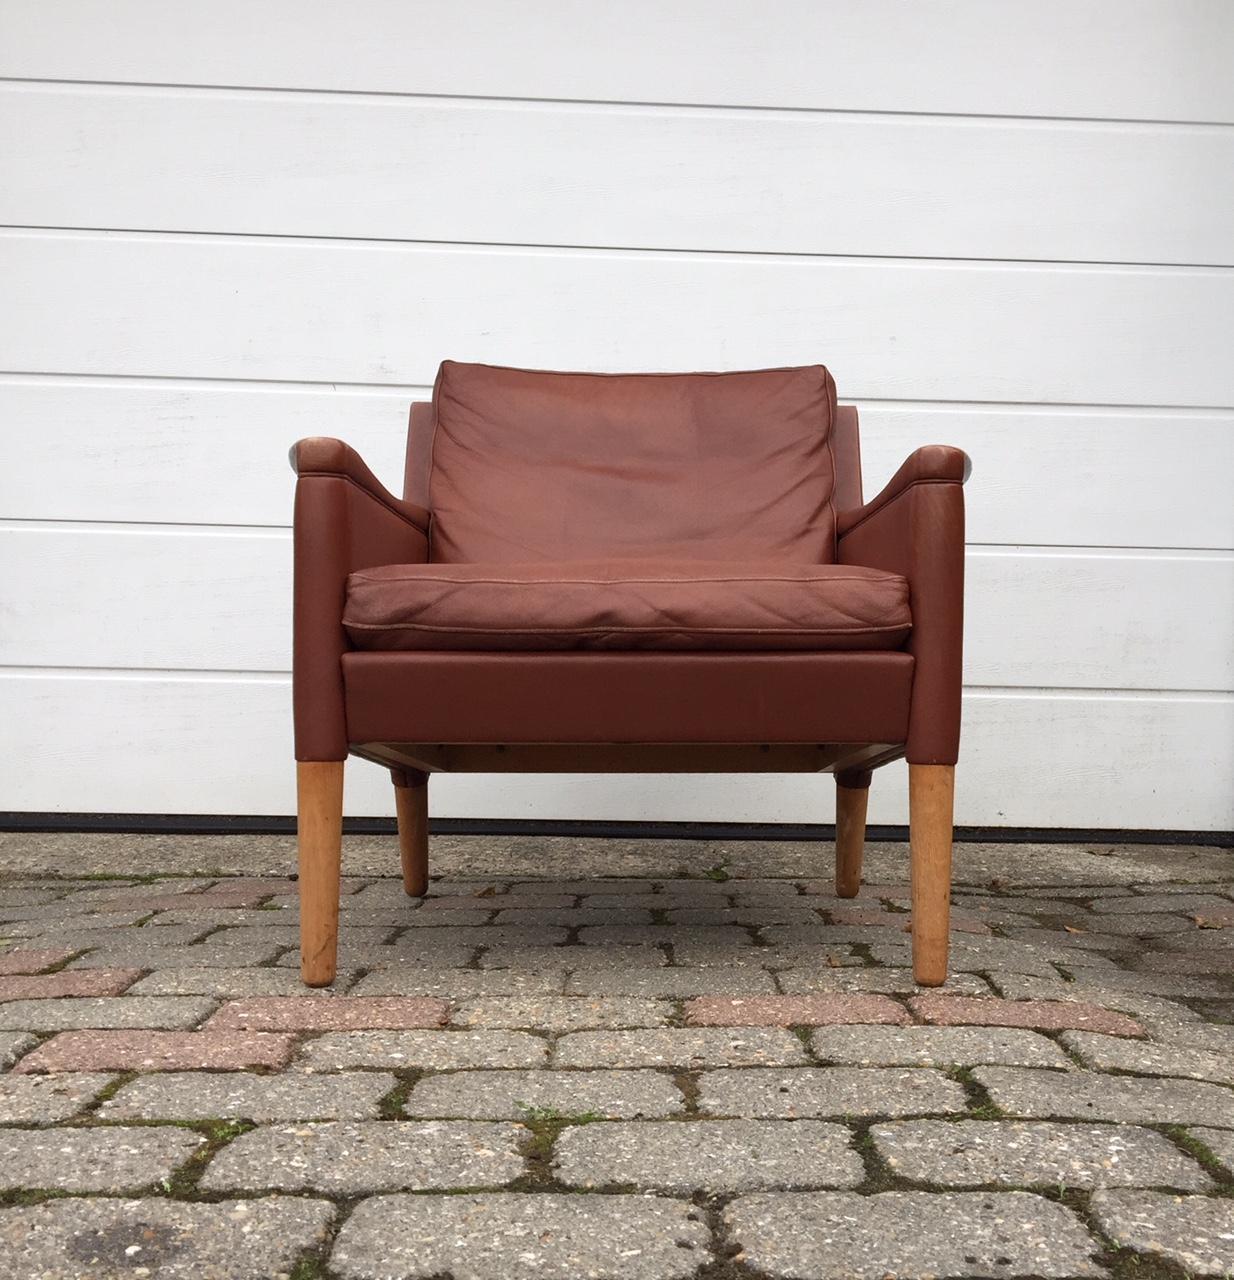 Kurt Ostervig designed tanned leather easy chair with tapered oak legs. It features original upholstery and intricate leather upholstery details around the top part of the legs and to the armrests. It was manufactured by Centrum Møbler in Denmark